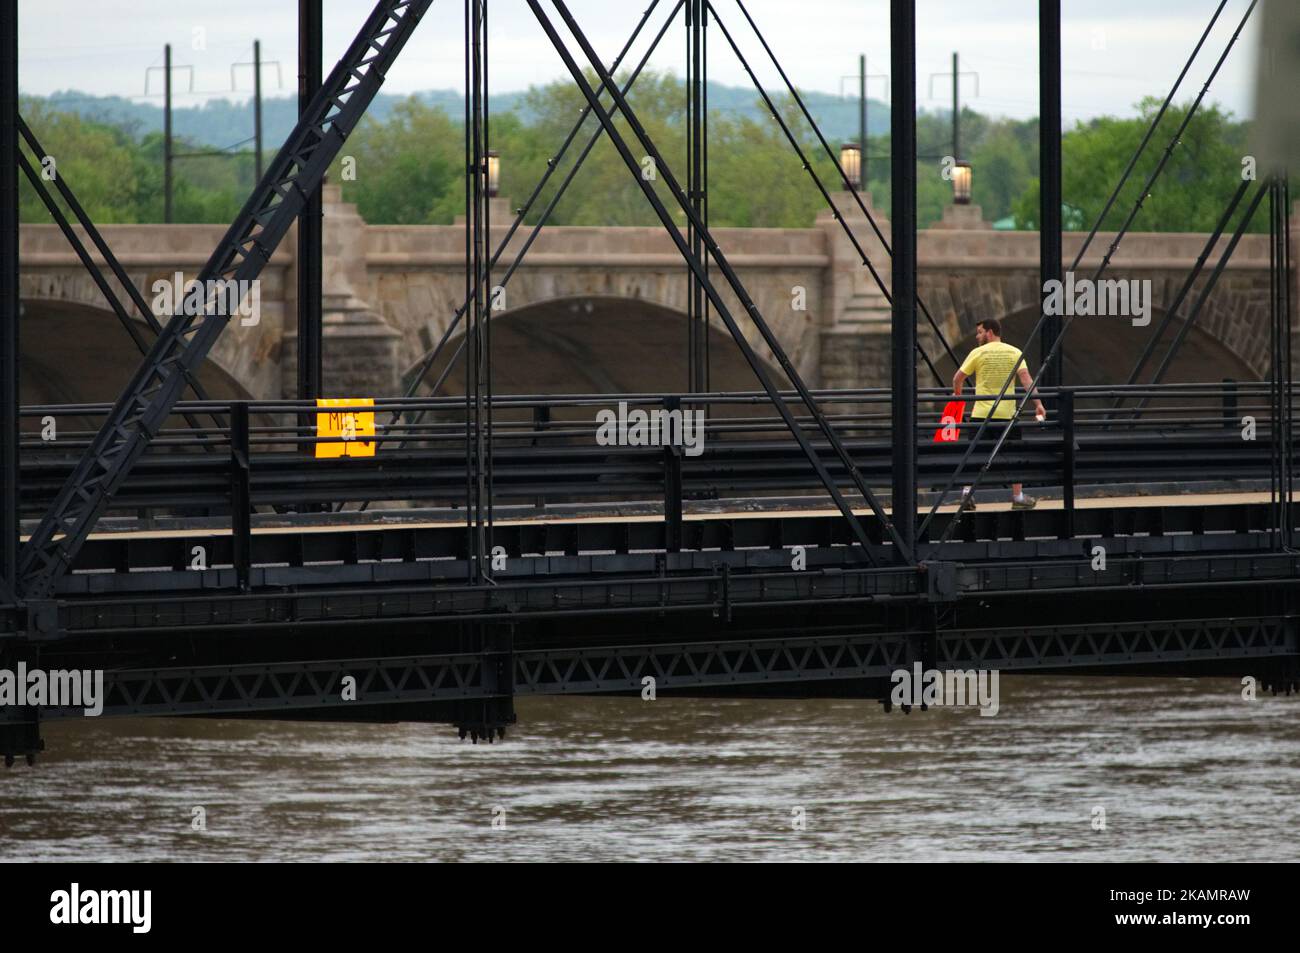 After mounting a one-mile marker a man is seen looking over his shoulder as he continues his way on the Walnut St. Bridge over the Susquehanna River, in Harrisburg, PA, on the morning of April 30, 2017. Diminishing retail, crumbling infrastructure, environmental issues, poverty and unemployment are shown in a view on the current state of a section of rural America on day 101 of Trump's Presidency. The Keystone state Pennsylvania formed an important factor in Trump's victory in the 2016 US elections. (Photo by Bastiaan Slabbers/NurPhoto) *** Please Use Credit from Credit Field *** Stock Photo